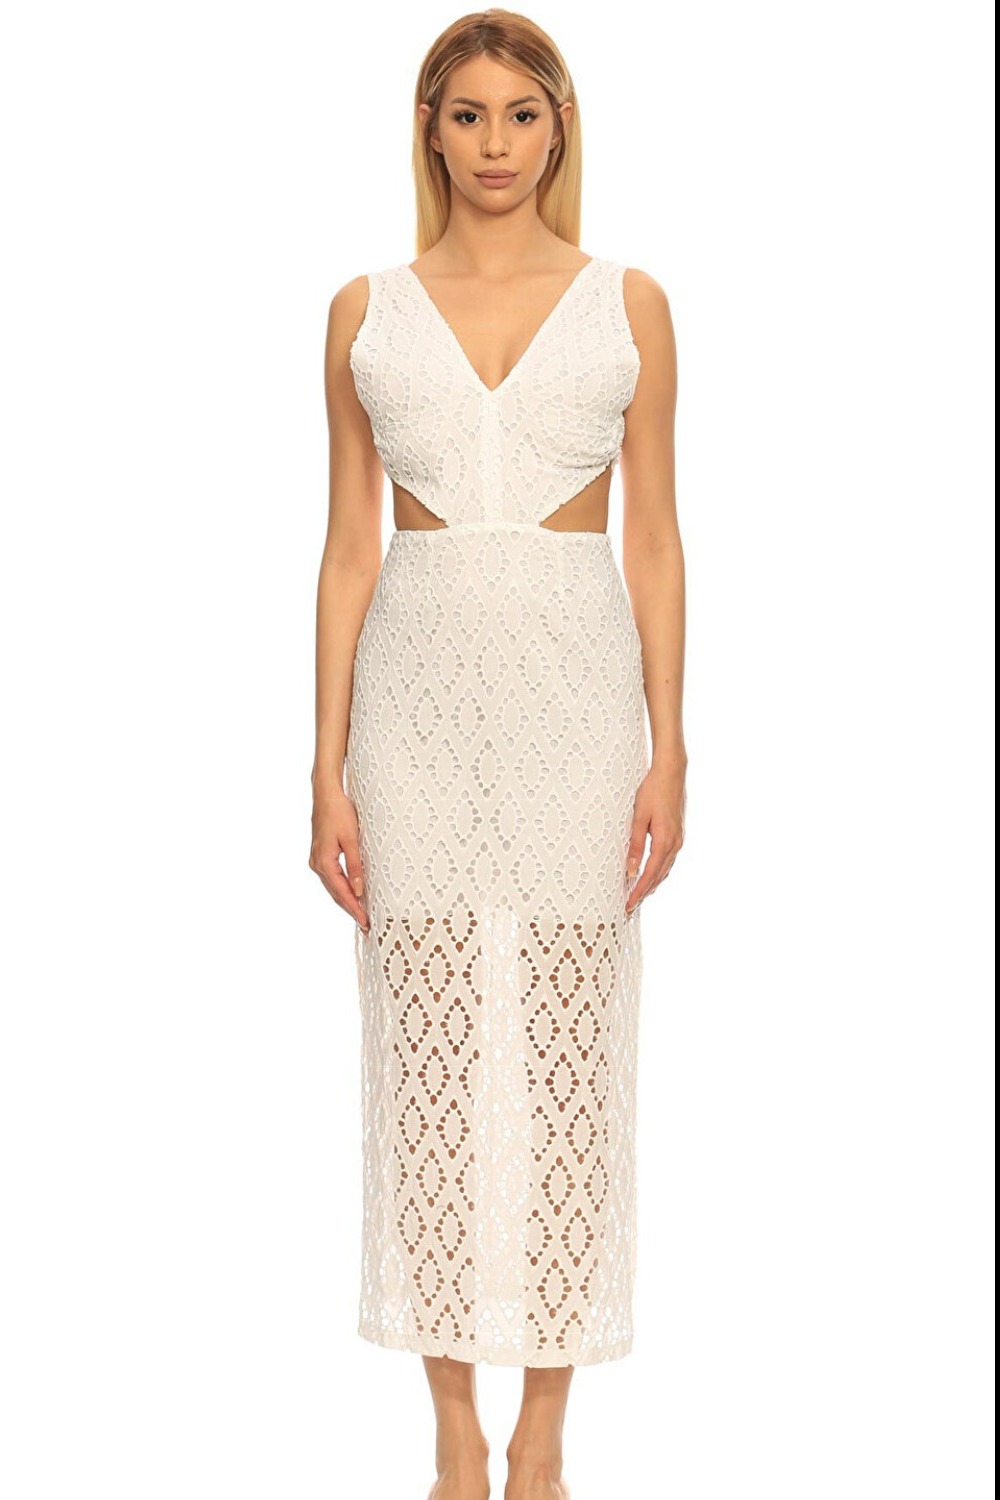 Venice White Embroidered Long Cut-out Summer Dress With Side Slits